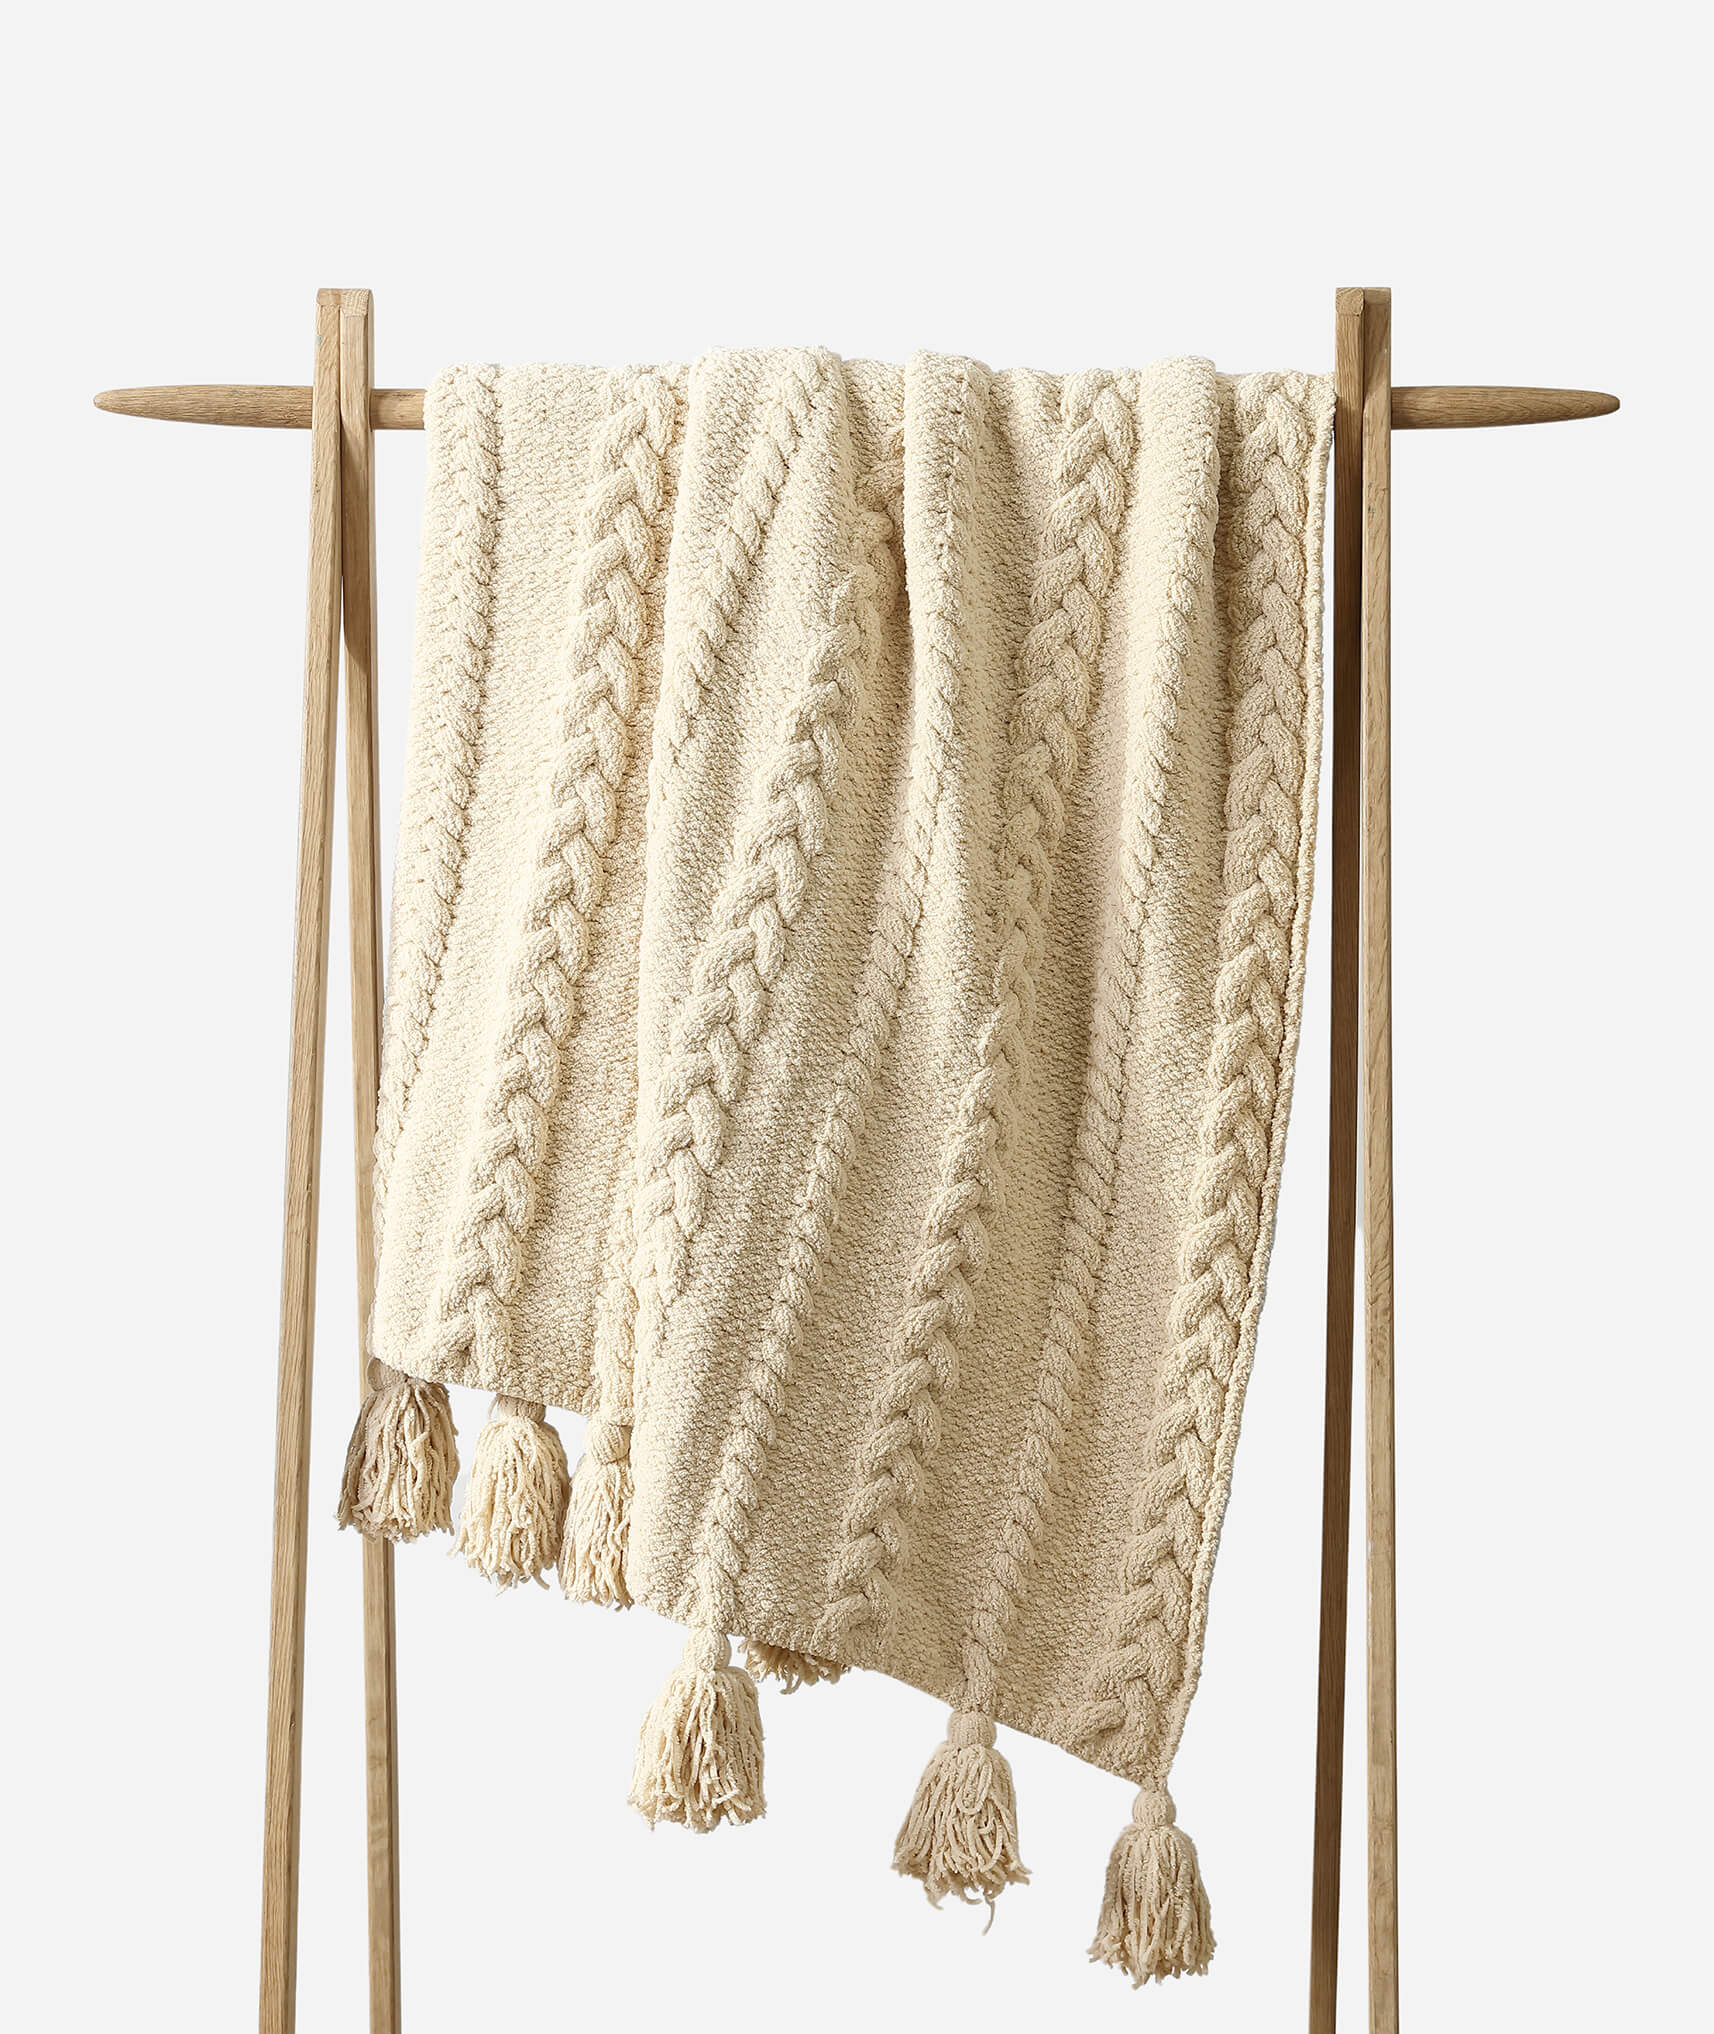 A cream-colored, cable-knit Braided Pom Pom Throw by Sunday Citizen with tasseled ends is draped over a minimalist wooden stand against a white background. Crafted from breathable, cozy fabric, the throw features a textured pattern with chunky braided designs and is OEKO-TEX® certified for added peace of mind.